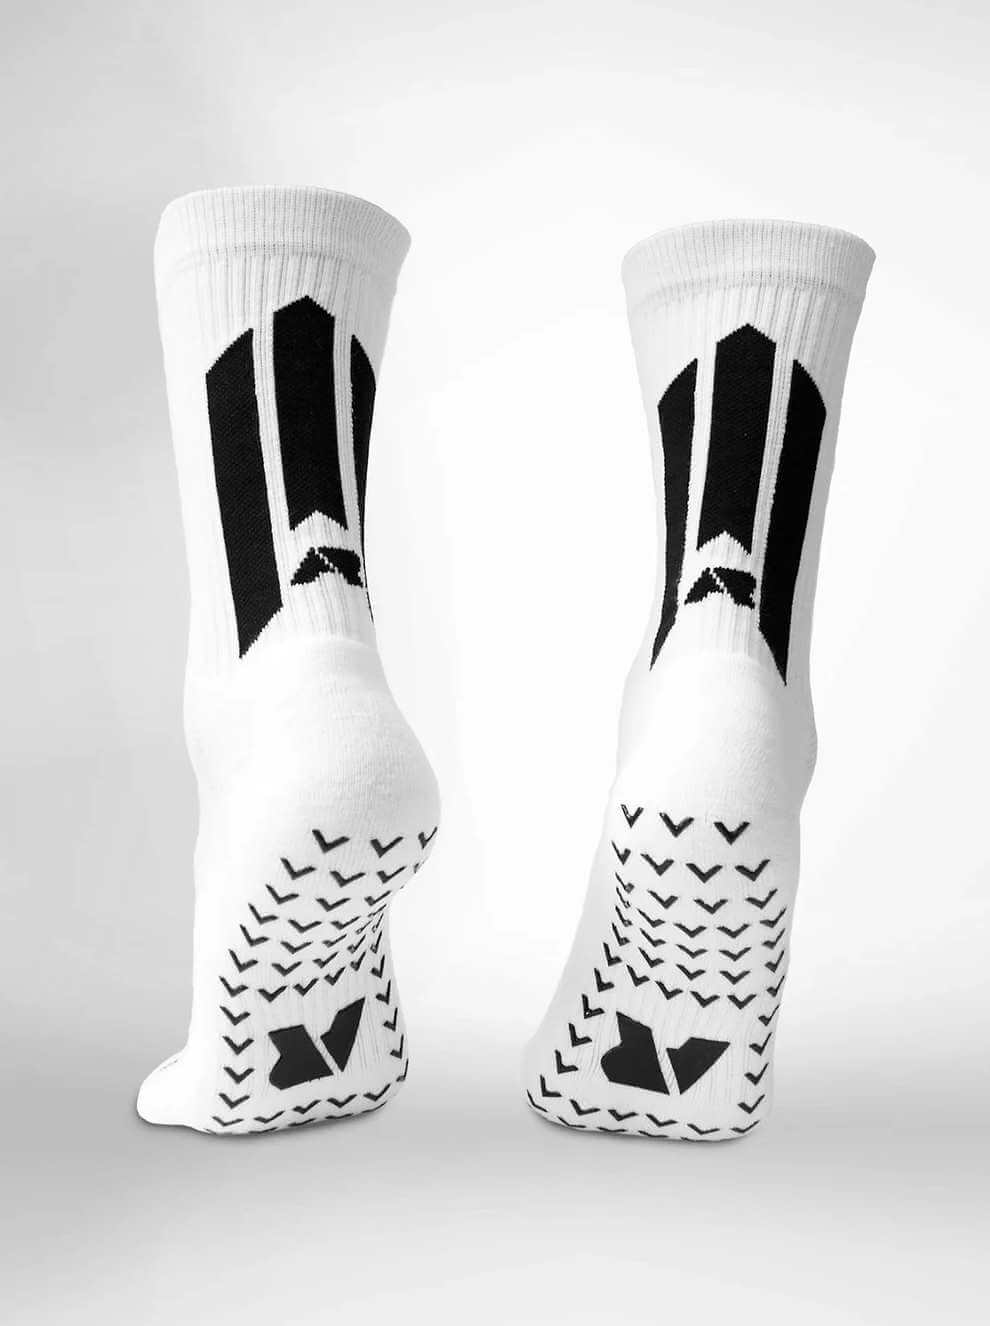 Rise Sports Grip Socks: Superior Traction and Stability for Enhanced Performance